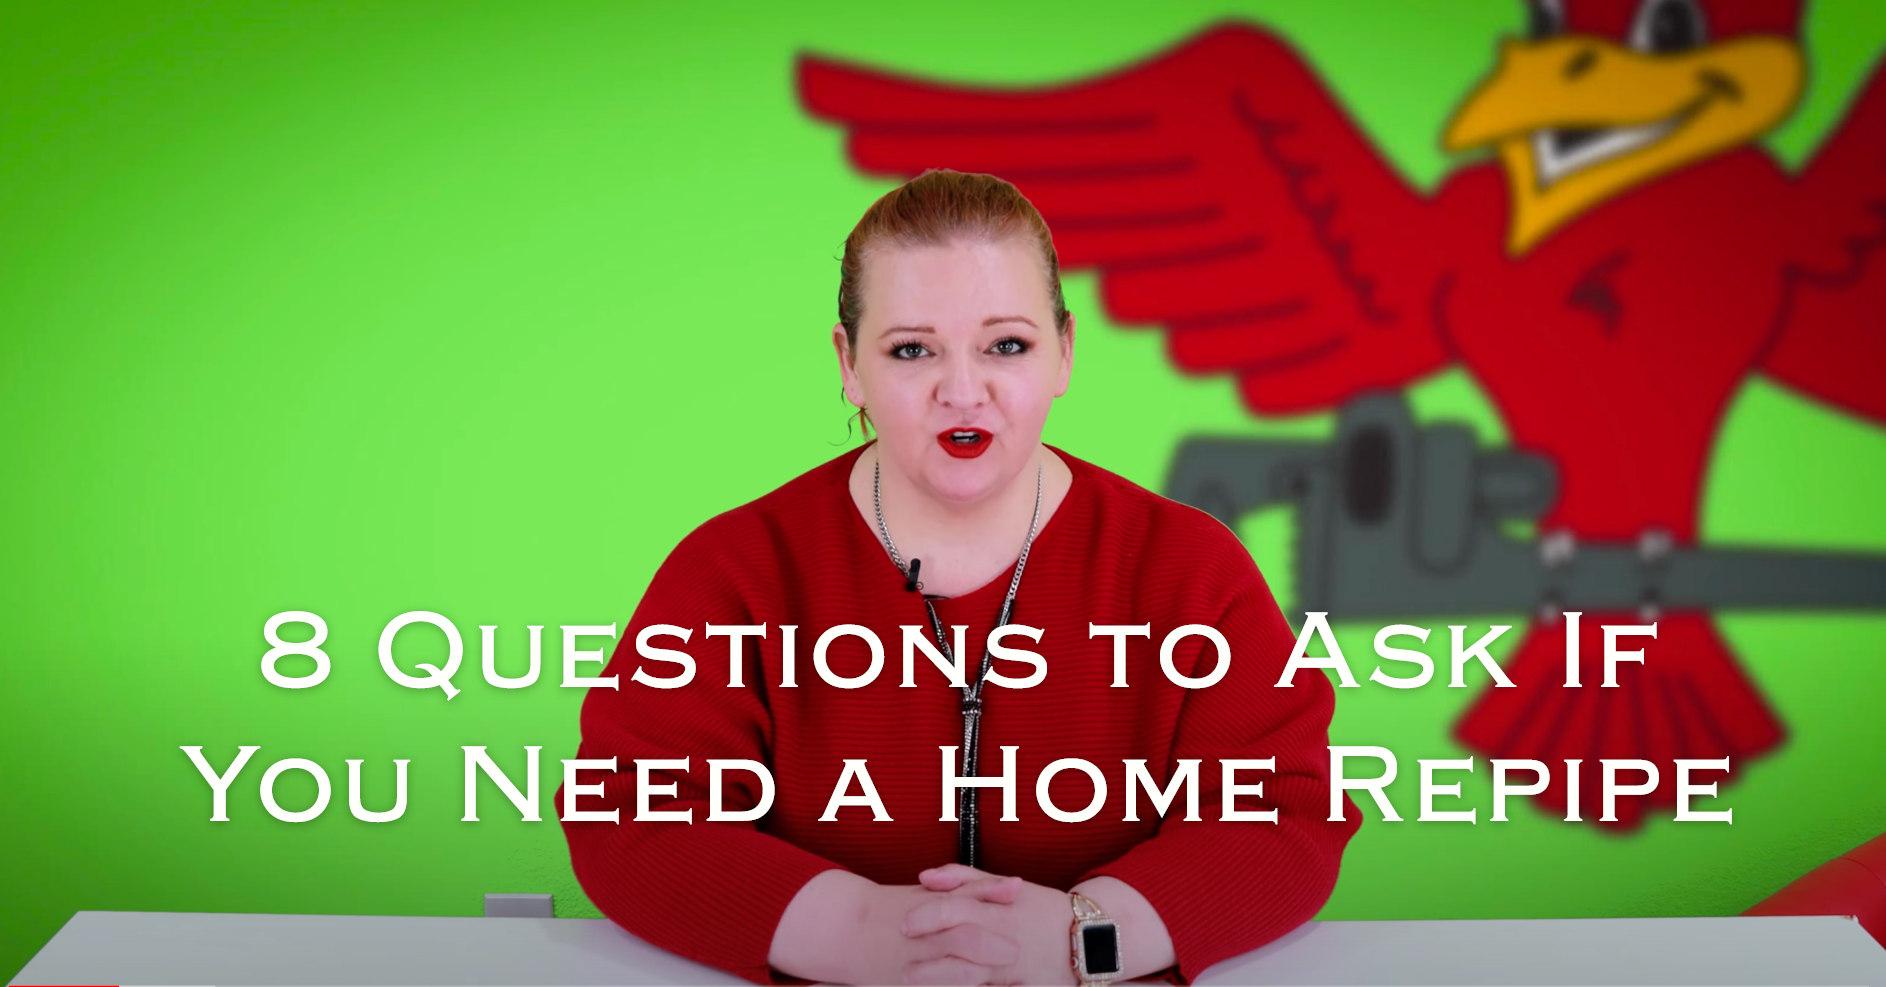 Owner of Robins Plumbing, Stephanie Robins with titled blog "8 questions to ask if you need a home repipe"